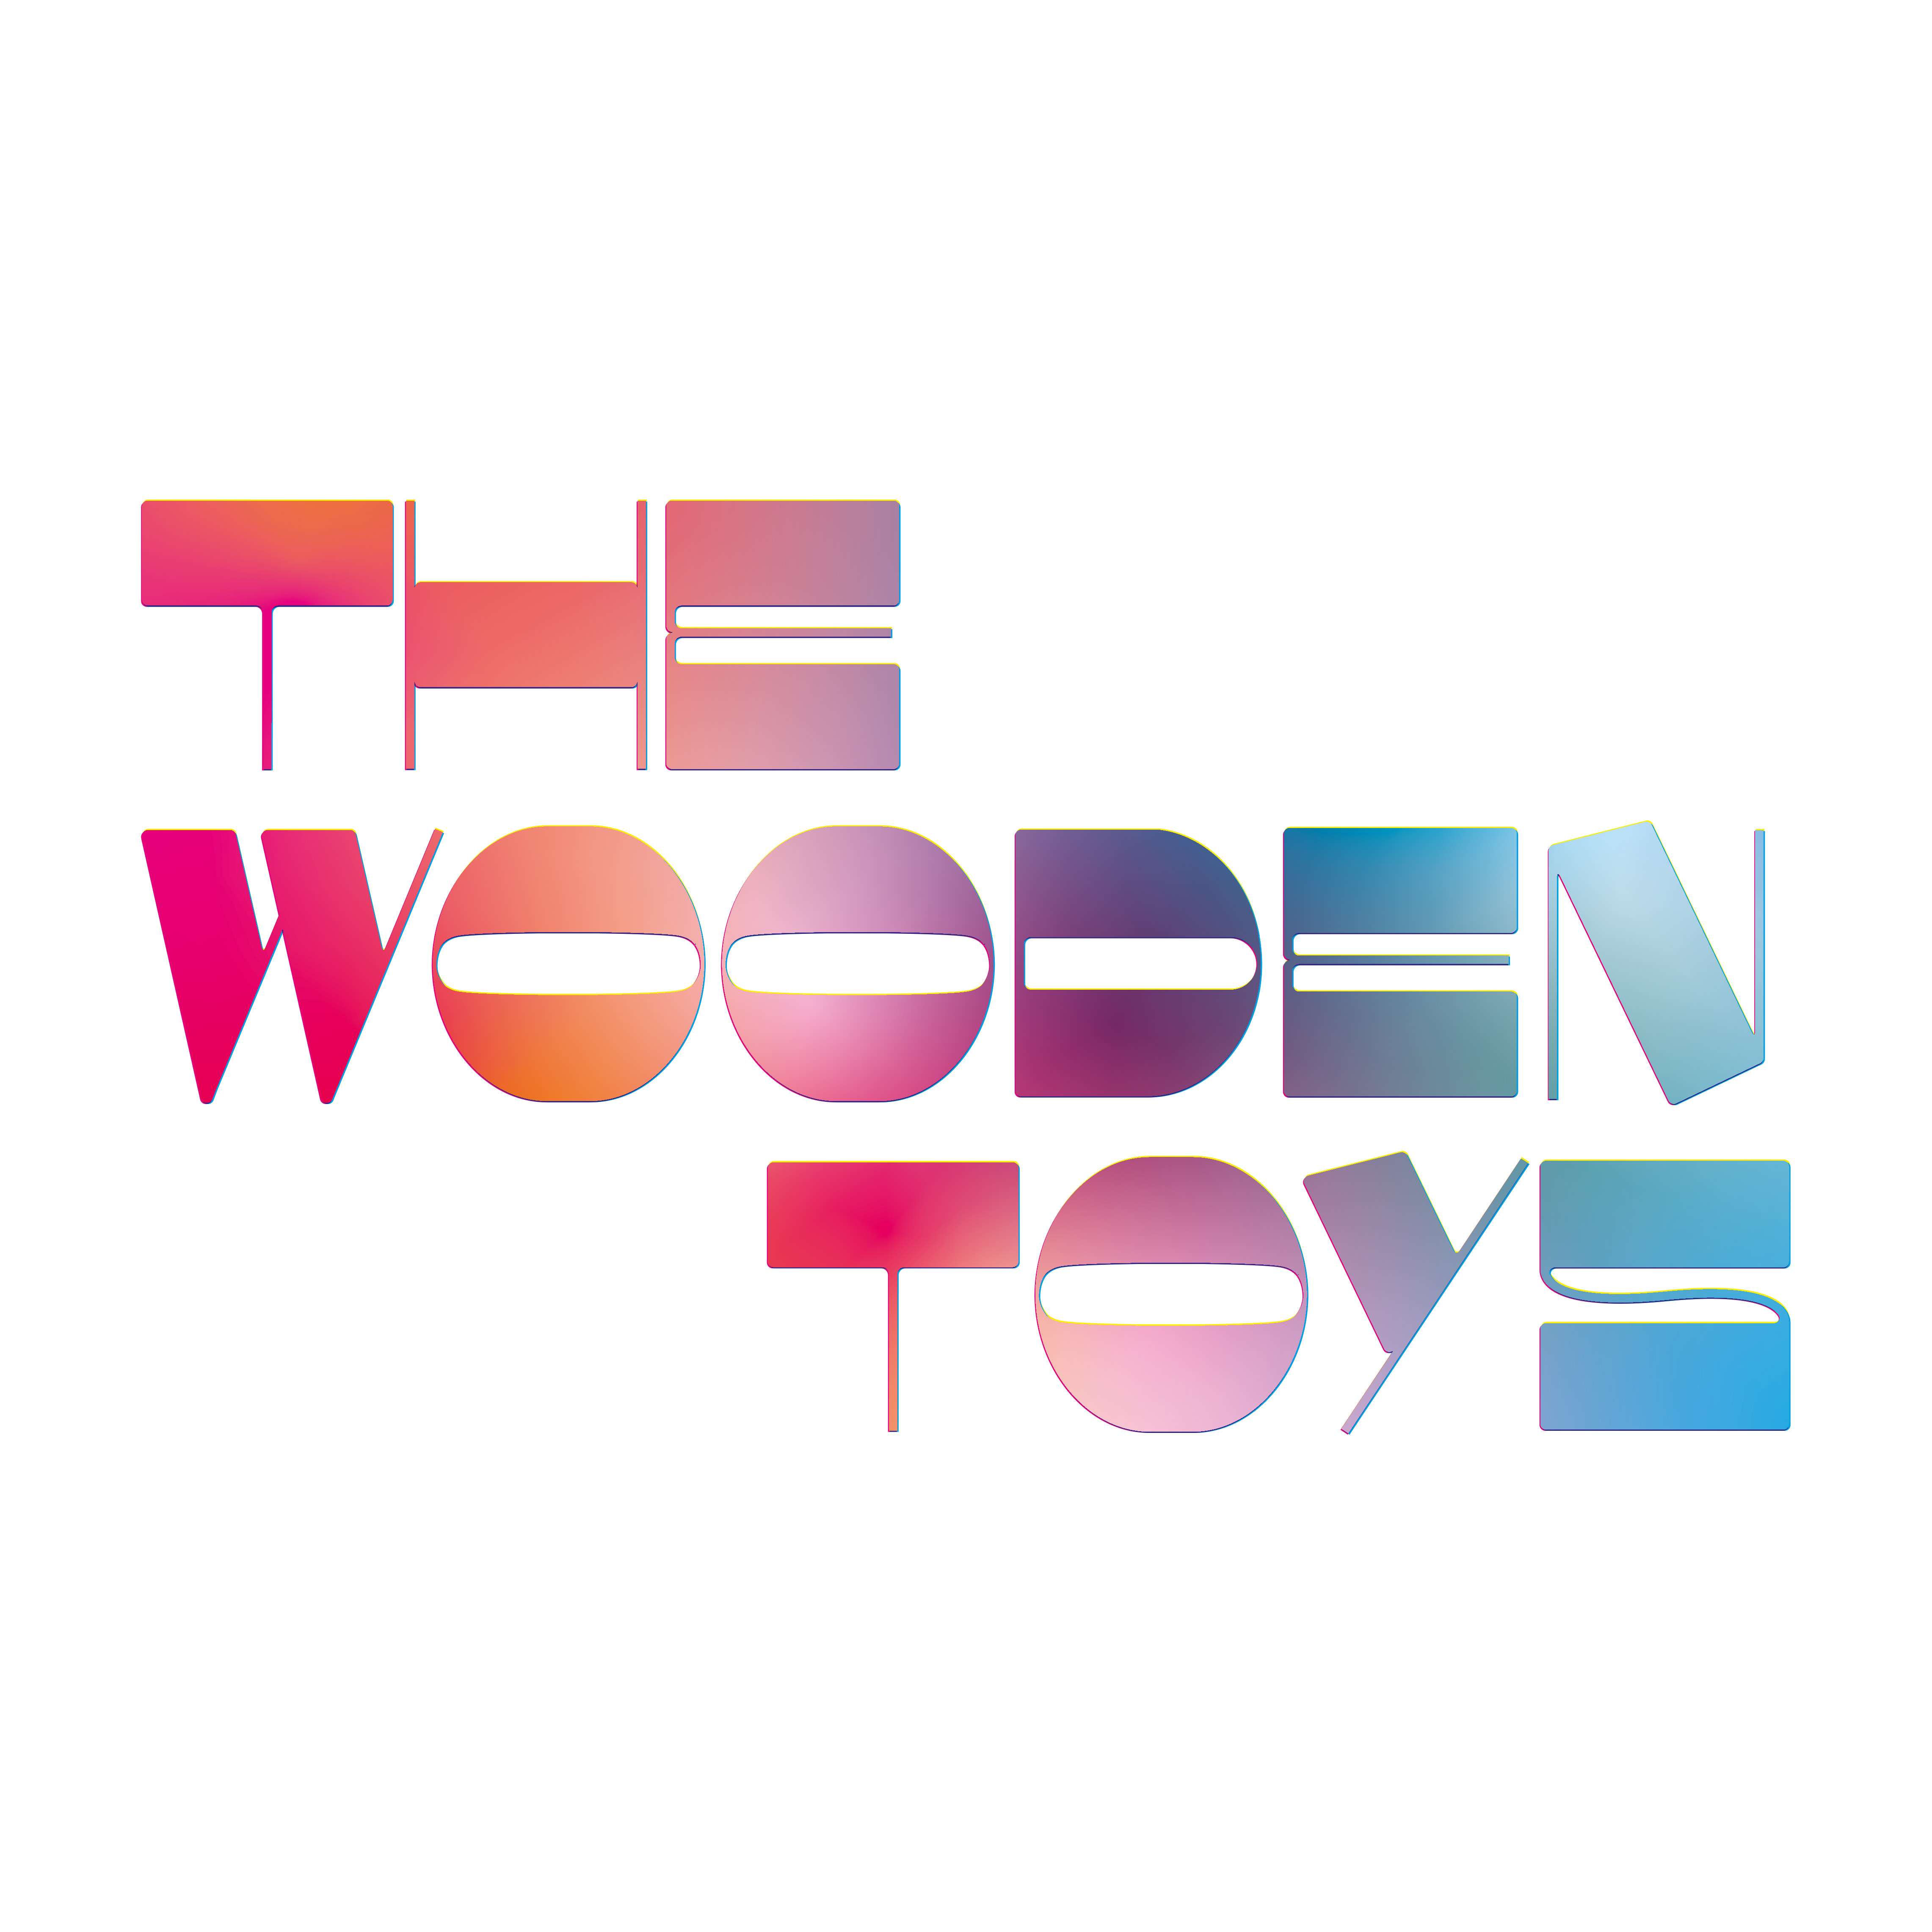 The Wooden Toys